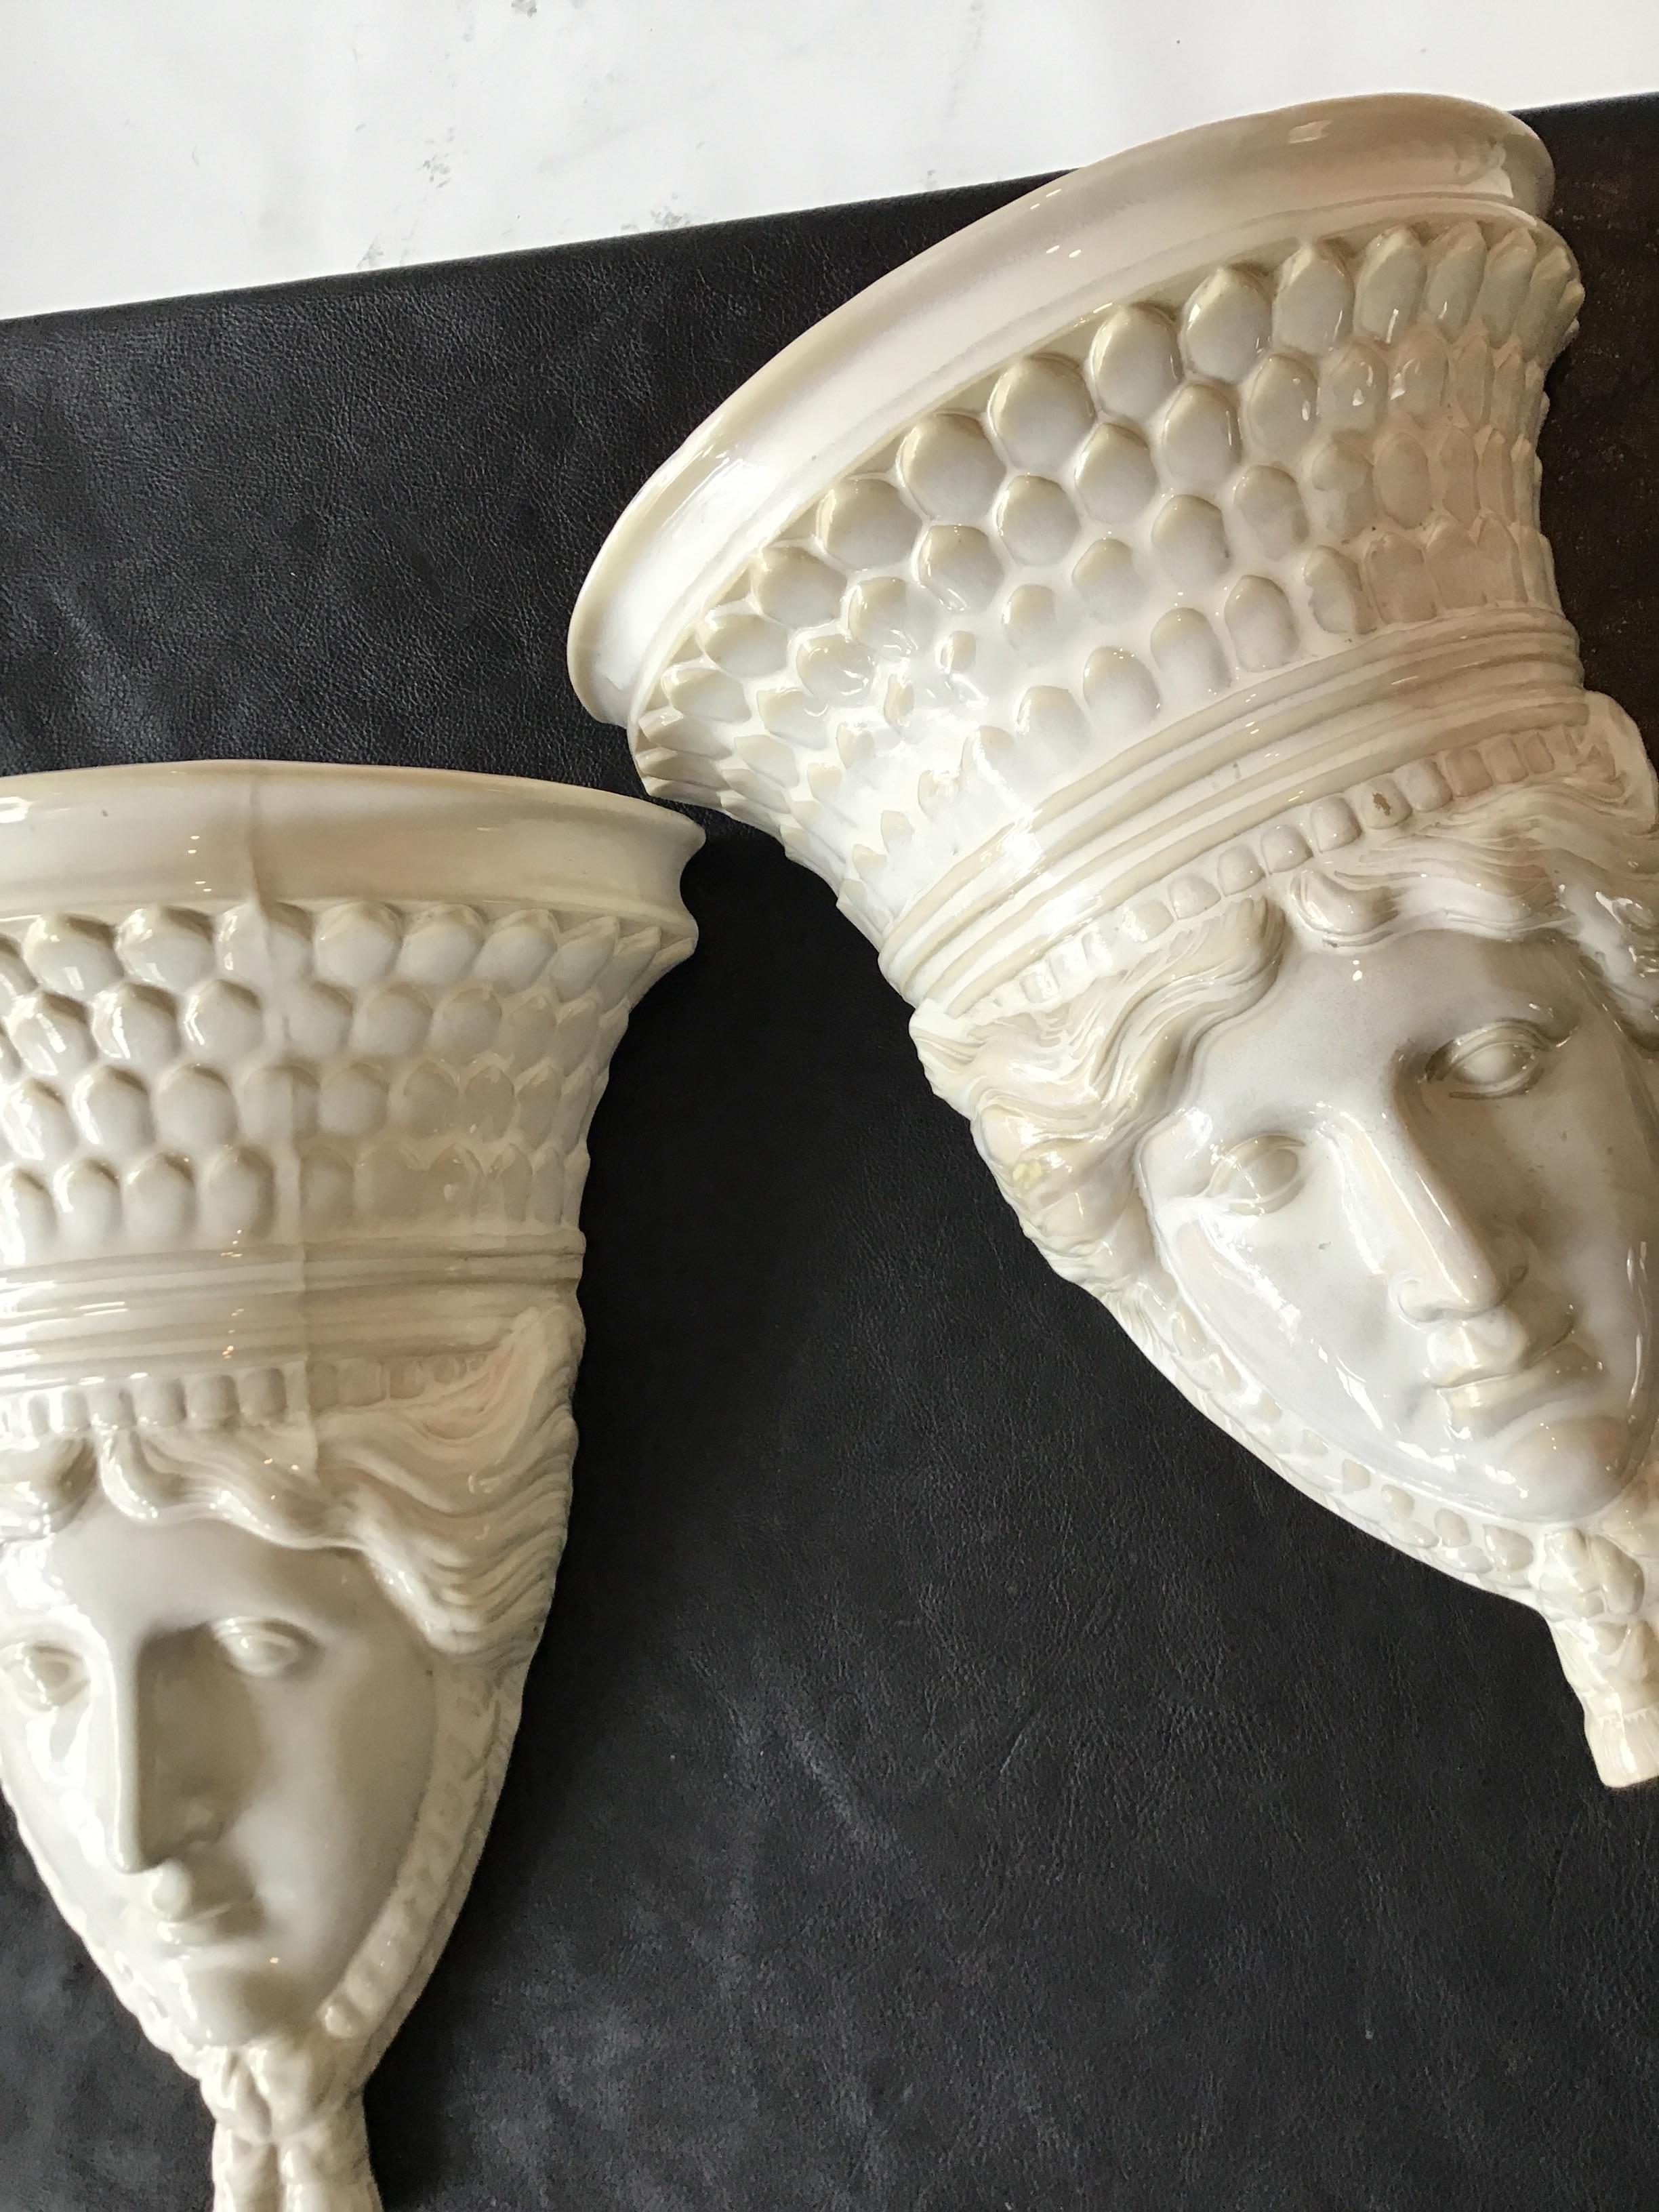 Pair of 1960s Ceramic Head Wall Planters by Sarreid In Good Condition For Sale In Tarrytown, NY